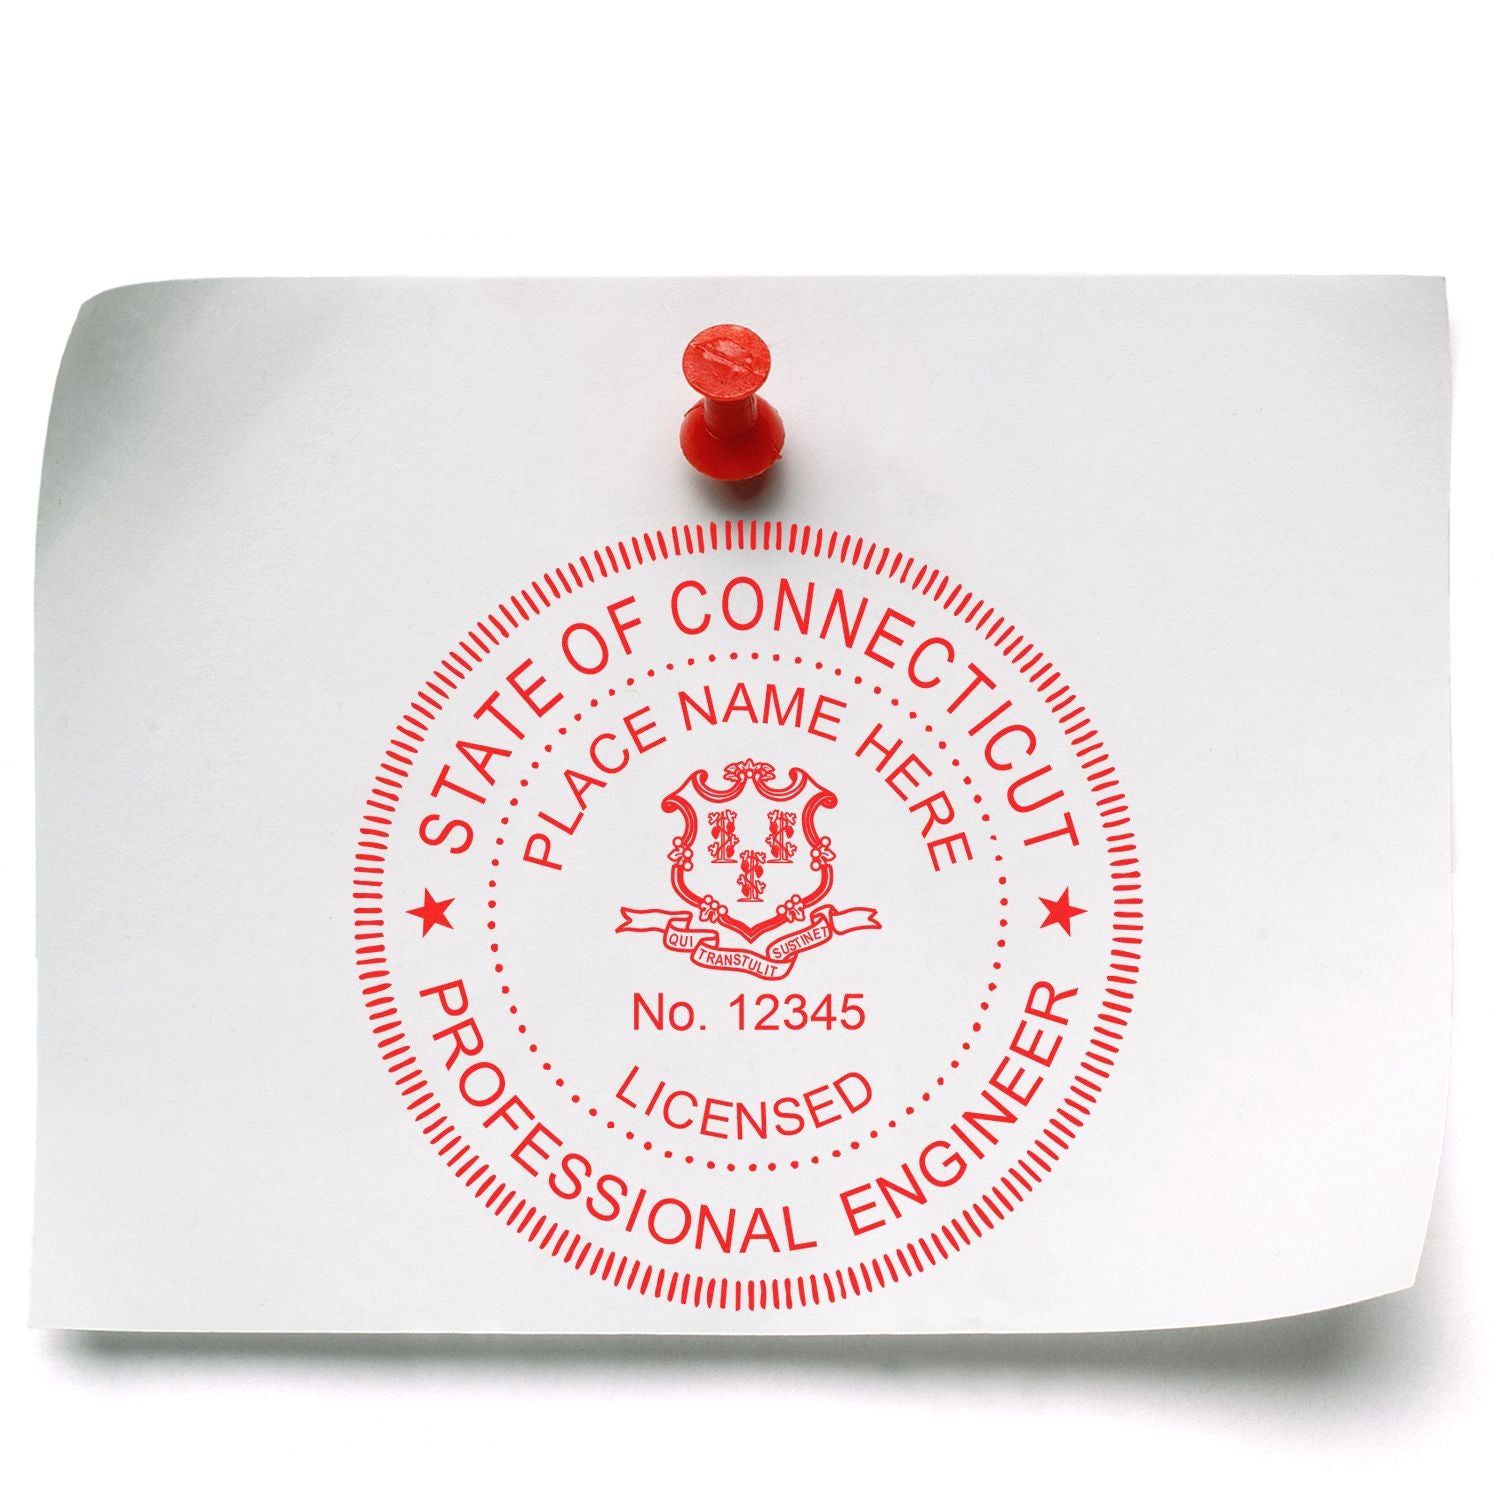 The main image for the Connecticut Professional Engineer Seal Stamp depicting a sample of the imprint and electronic files